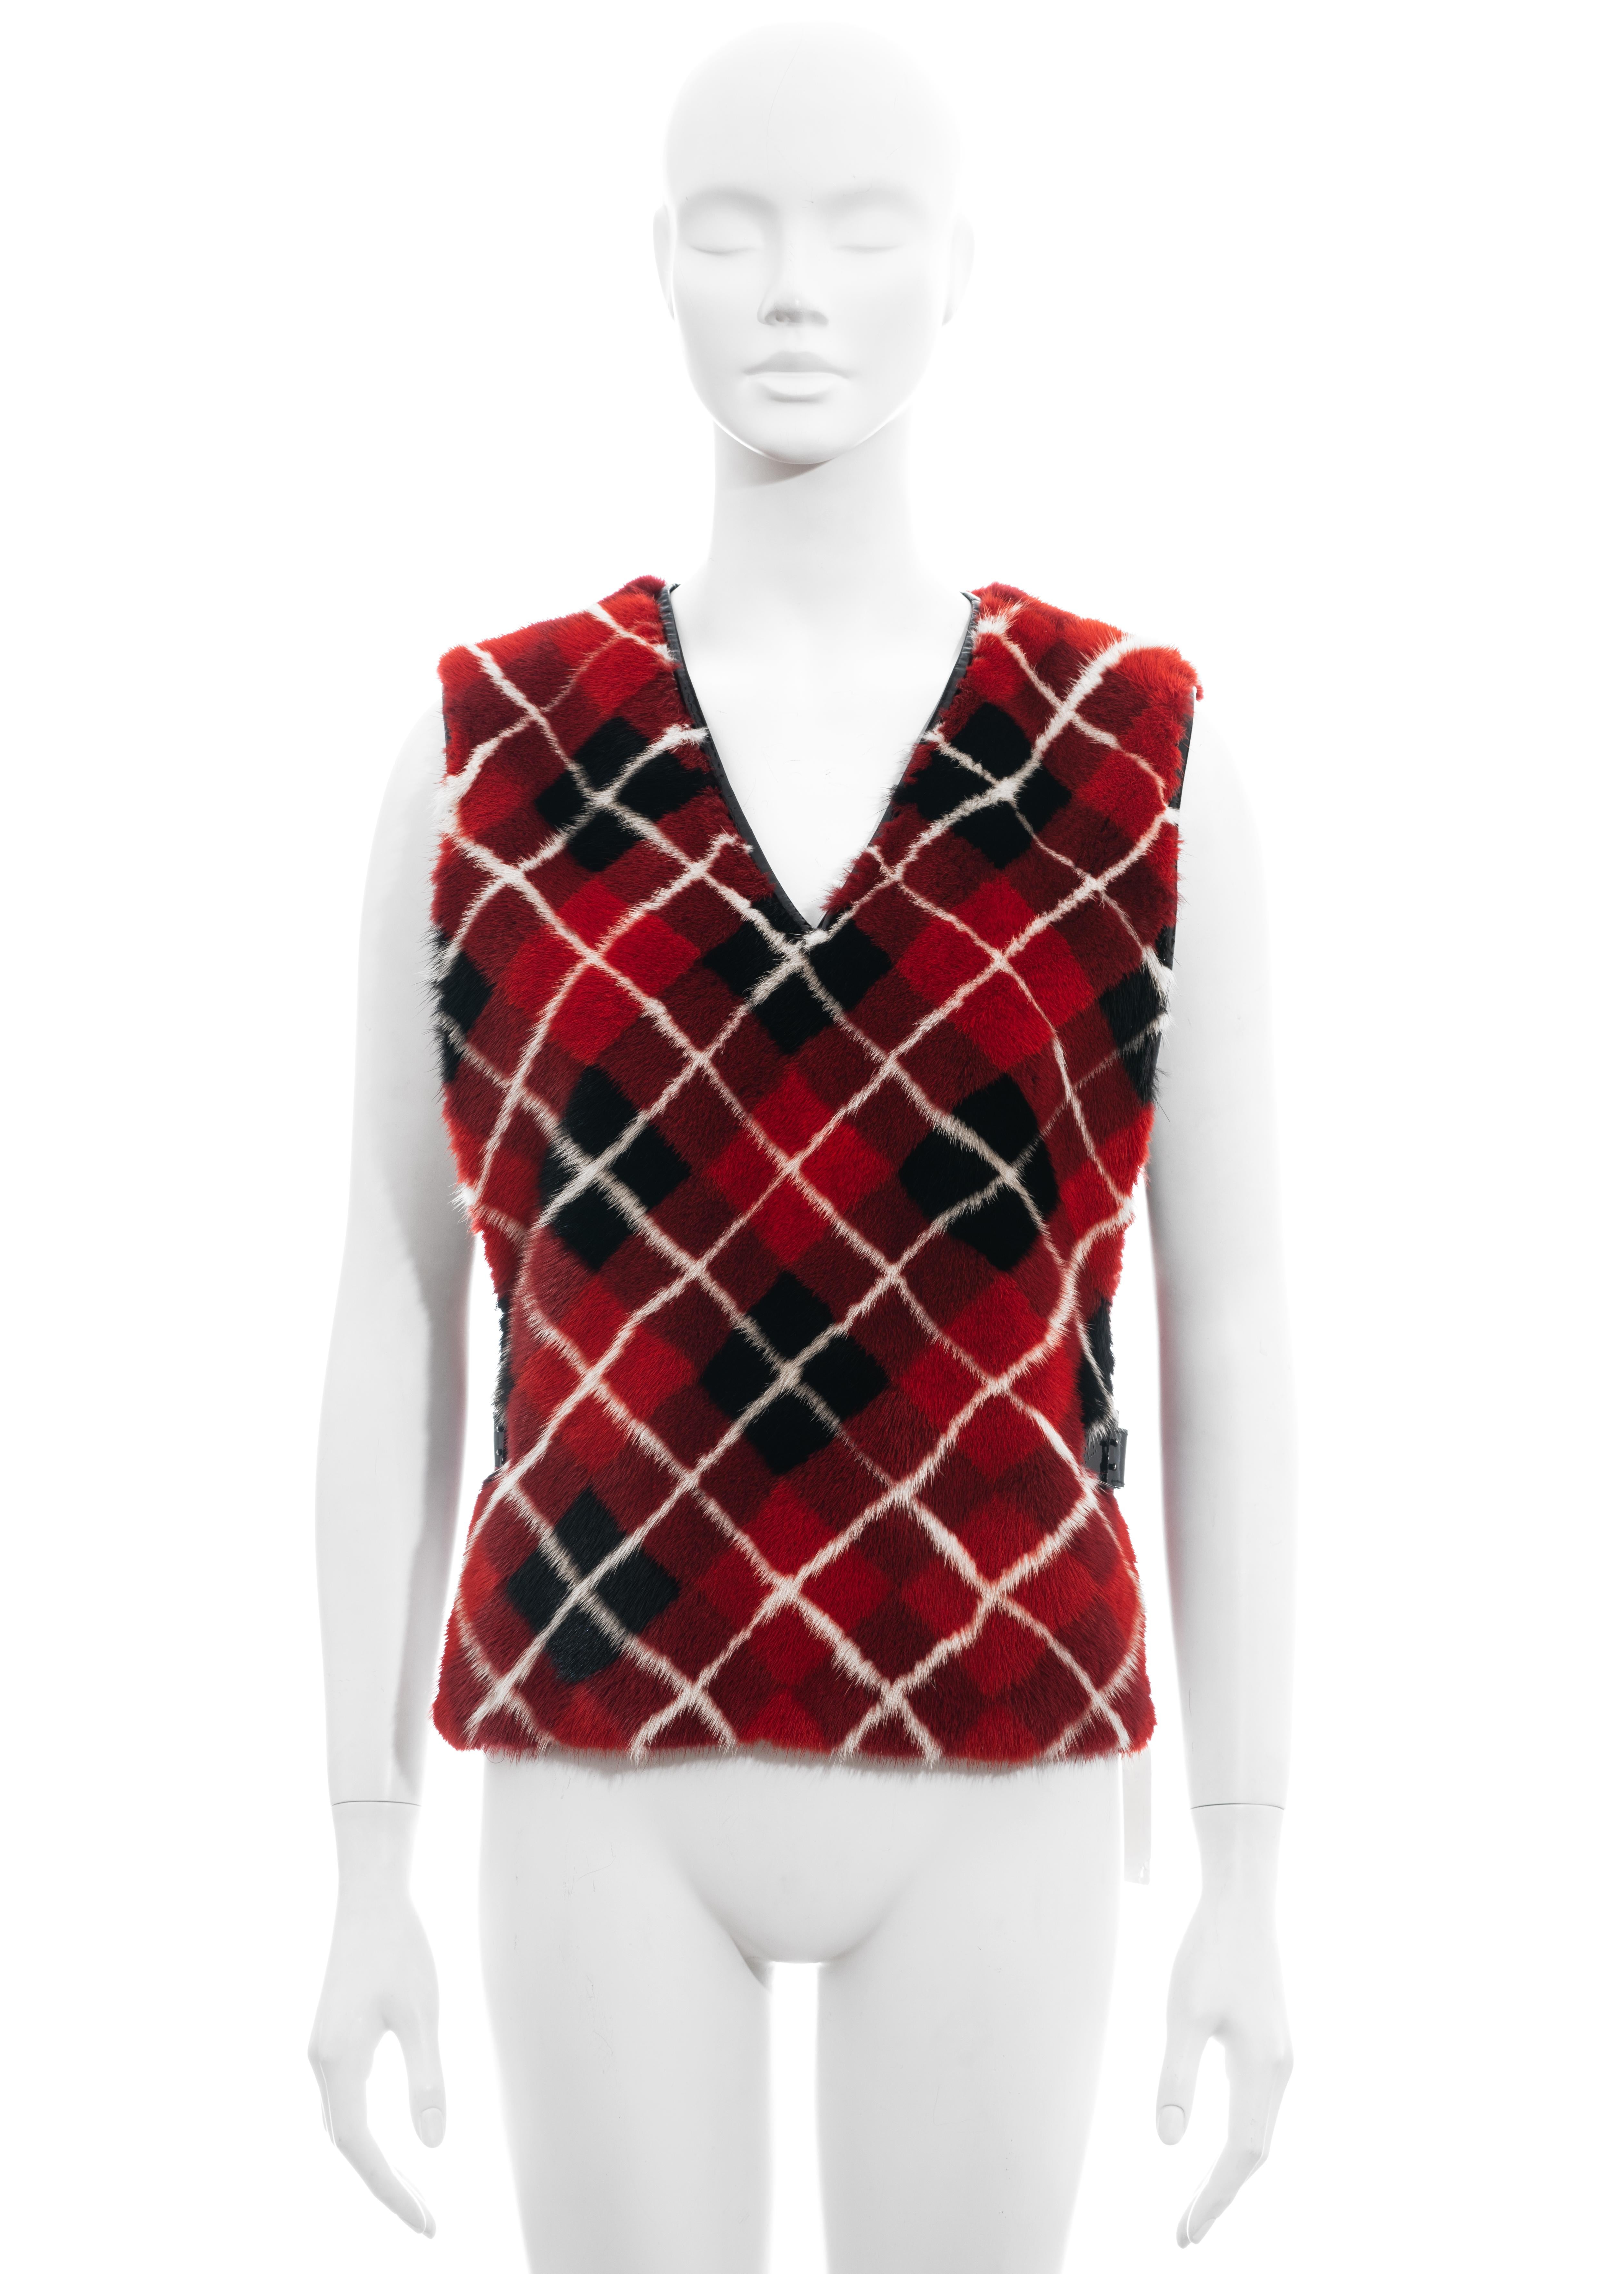 ▪ Jean Paul Gaultier red argyle print fur vest
▪ 100% Mink
▪ Black patent leather buckle fastenings and trim
▪ Silk Lining
▪ FR 38 - UK 10 - US 6
▪ Fall-Winter 2007